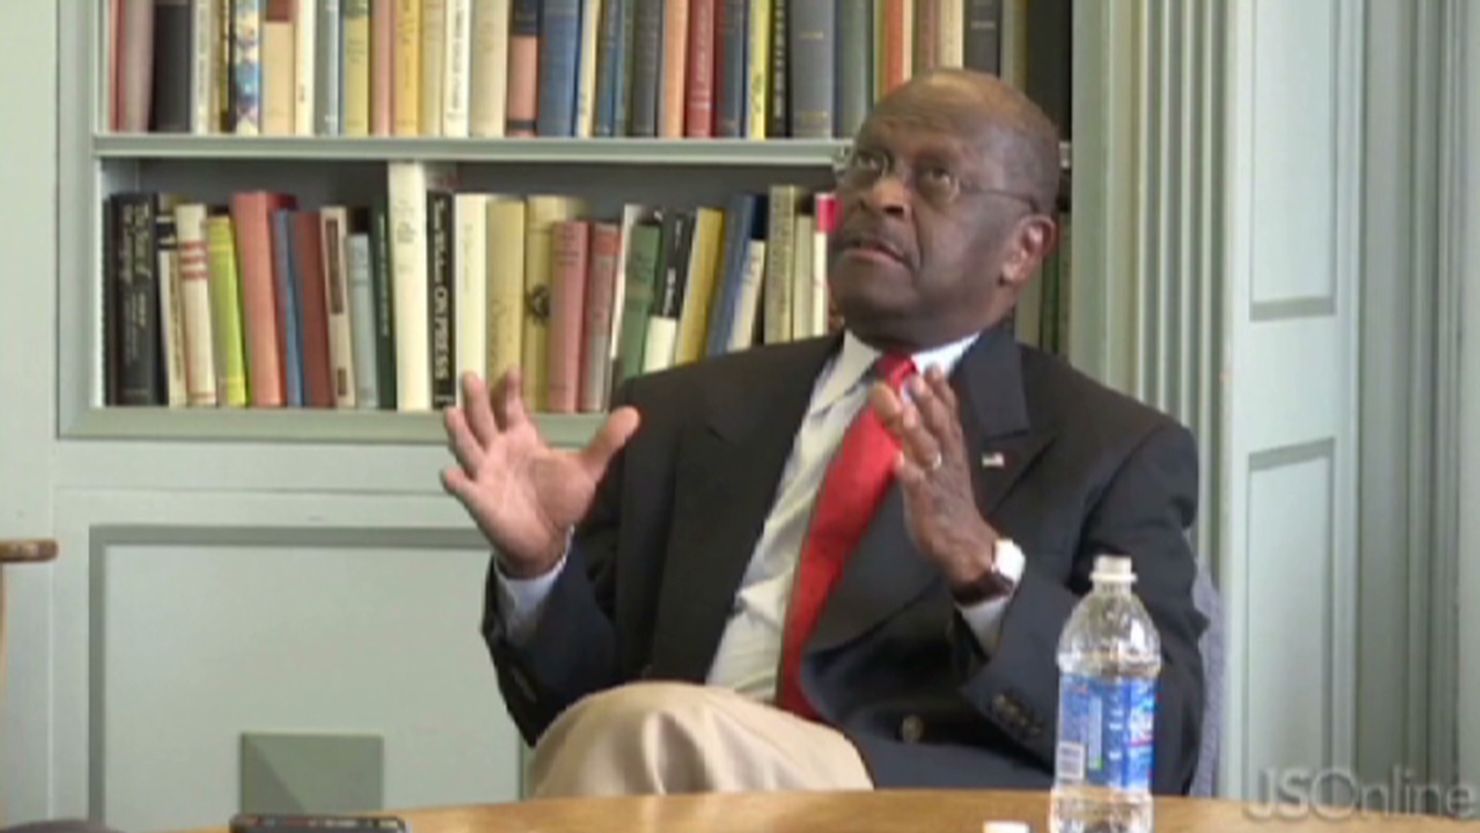 Herman Cain appeared to have difficulty responding to a question at a Milwaukee newspaper about U.S. policy on Libya.